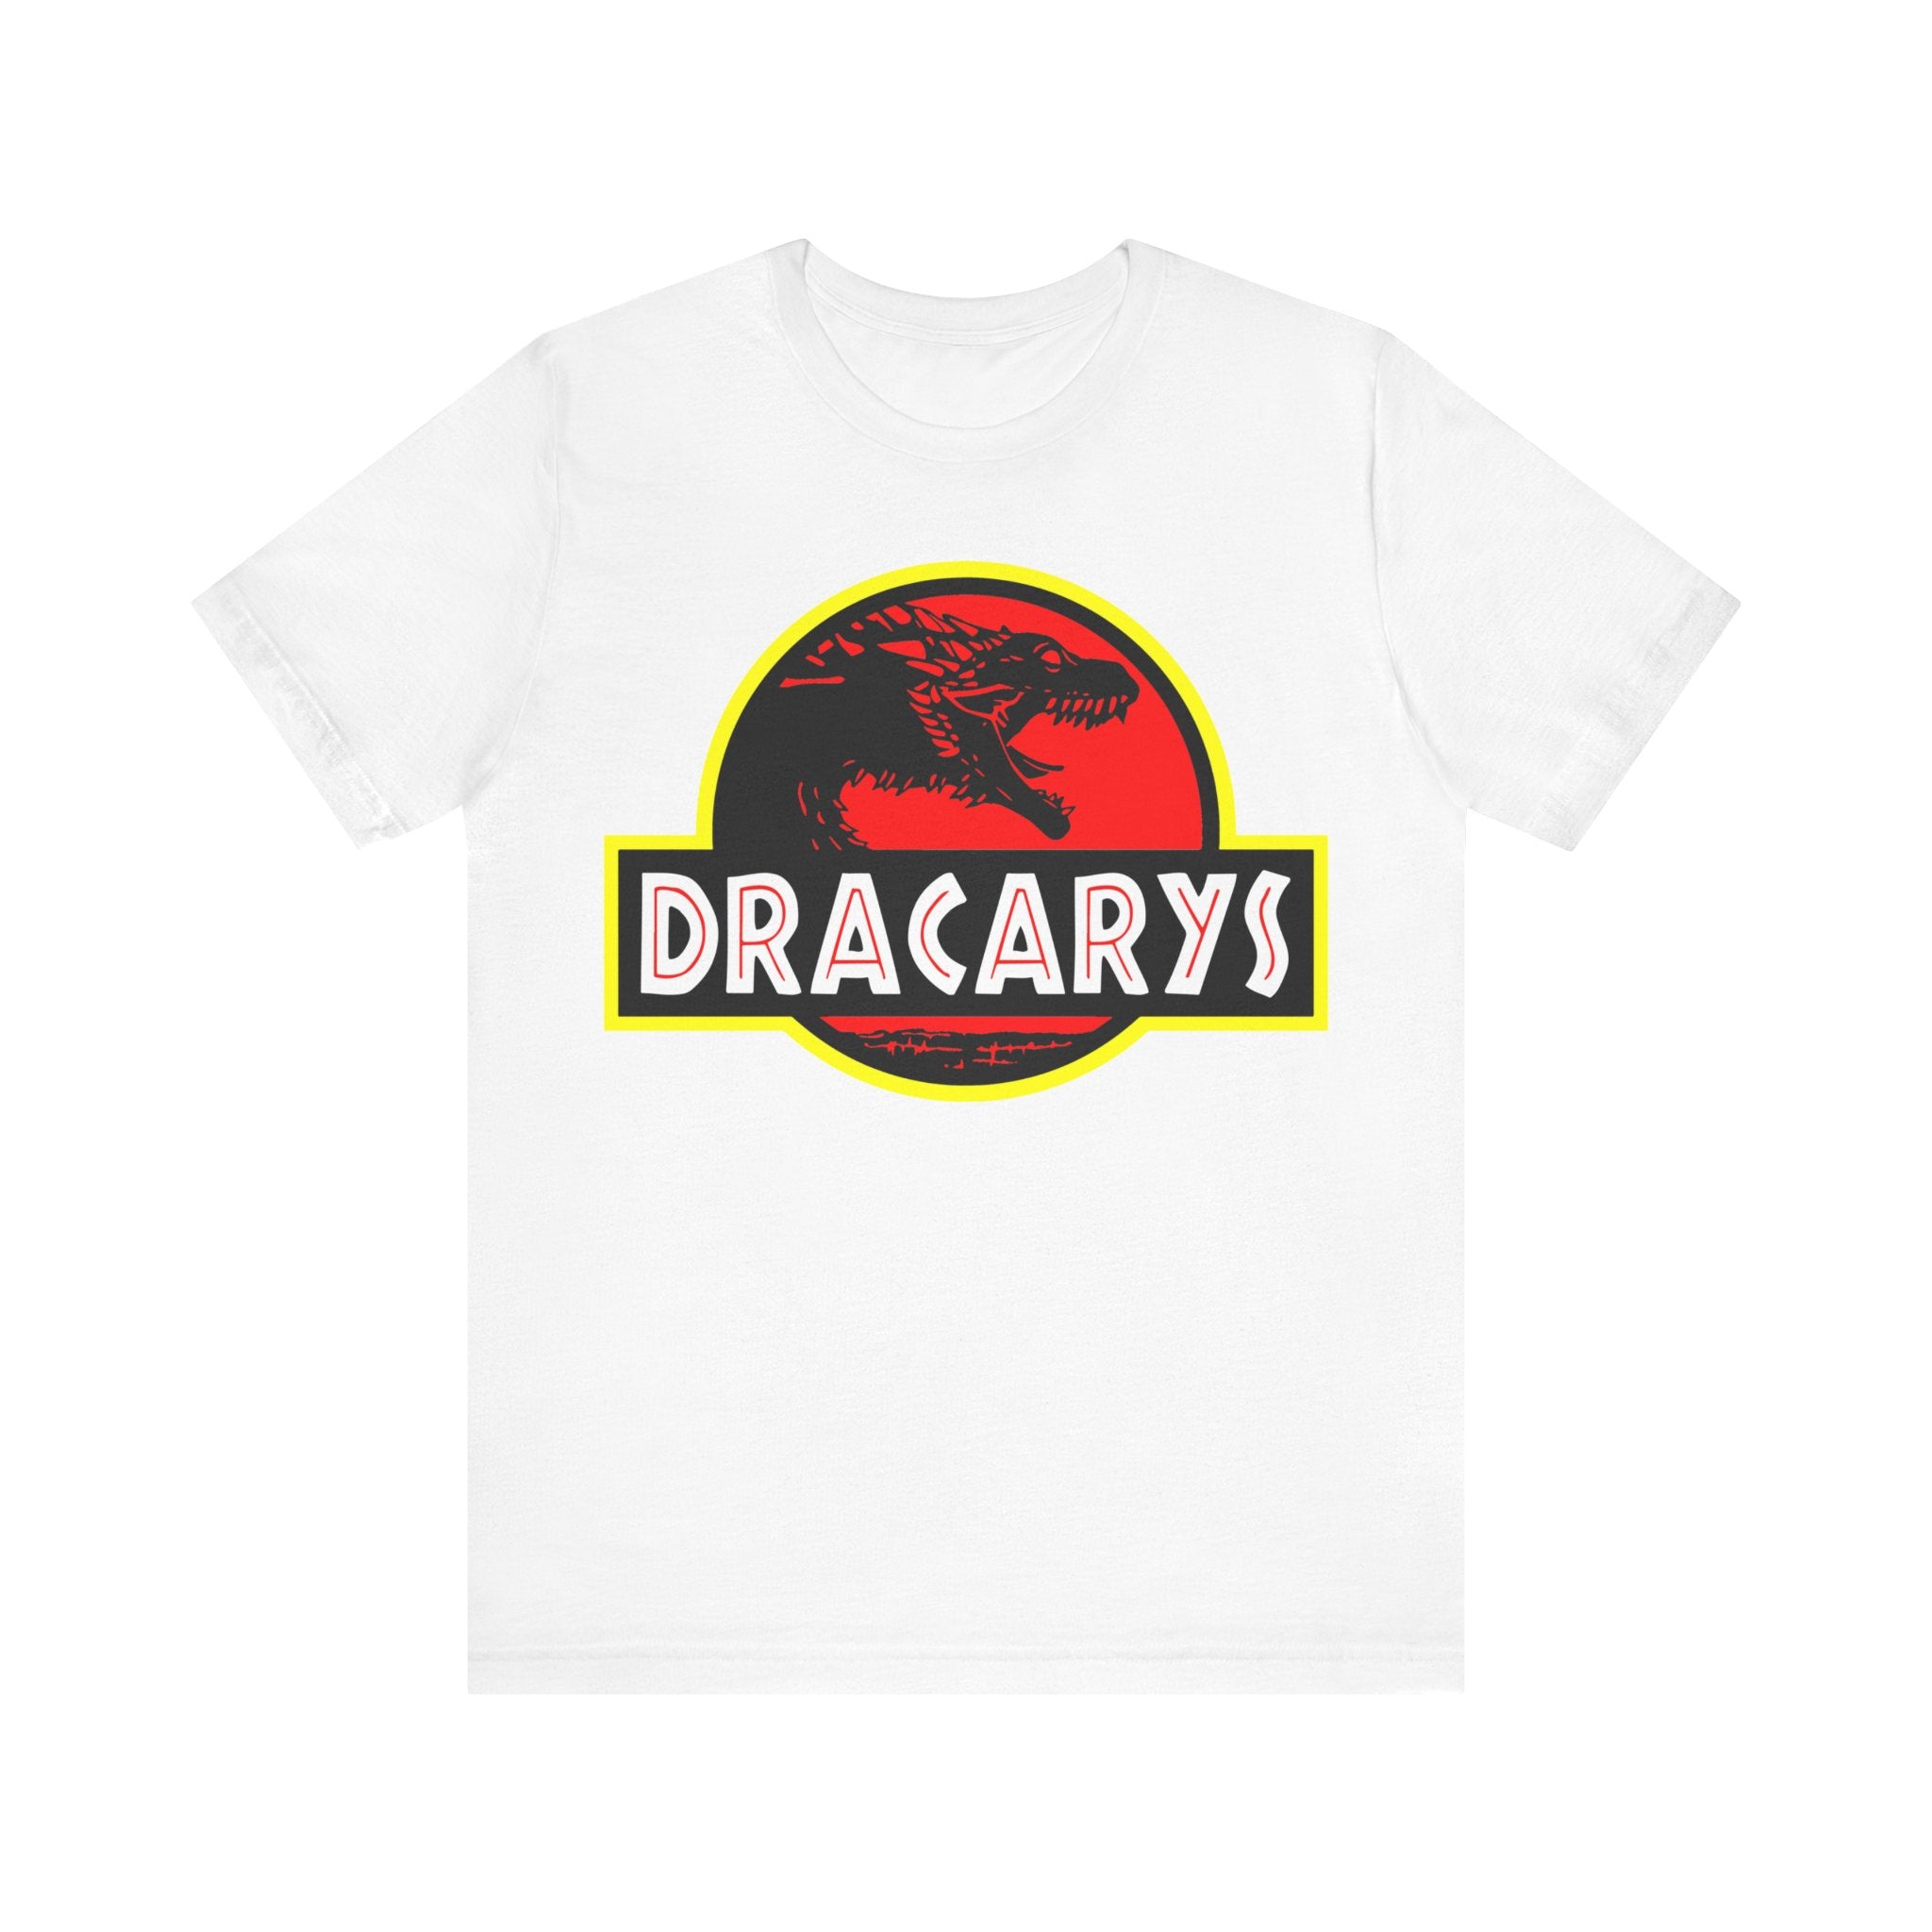 Dracarys T-Shirt with a red and yellow circular design featuring a quality print of a black dragon silhouette and the word "dracarys" in bold yellow letters.